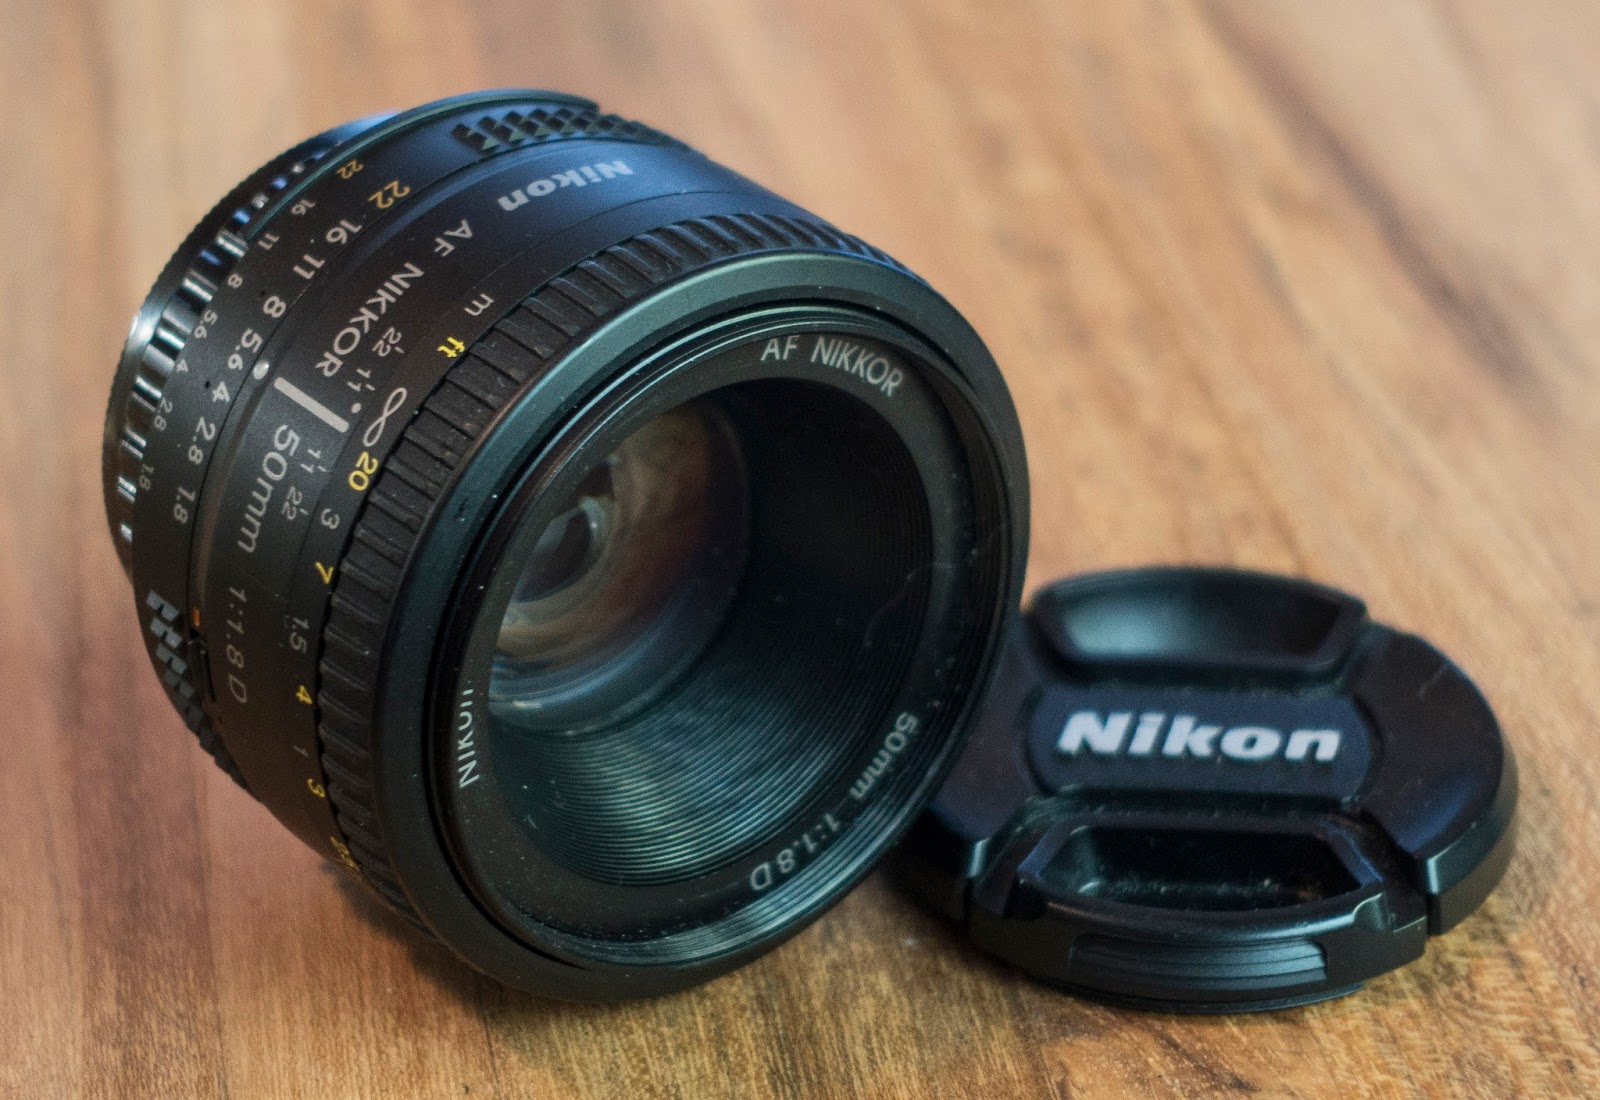 Playing With Lenses: The Value of Cheap - part 2: Nikon AF Nikkor 50mm 1.8 D